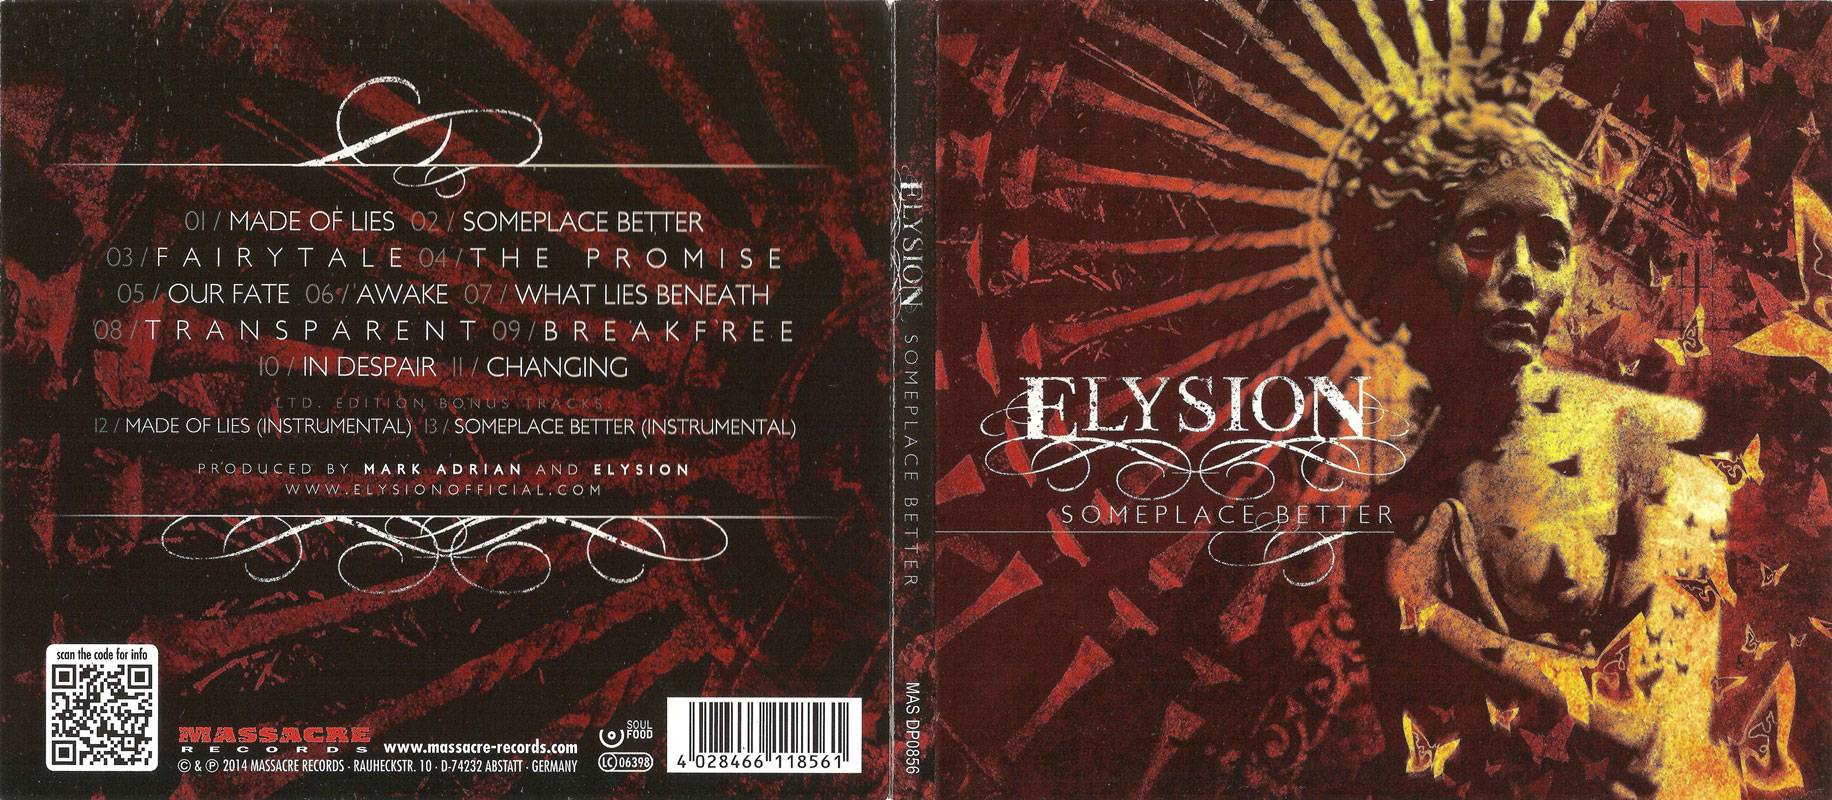 elysion someplace better album than